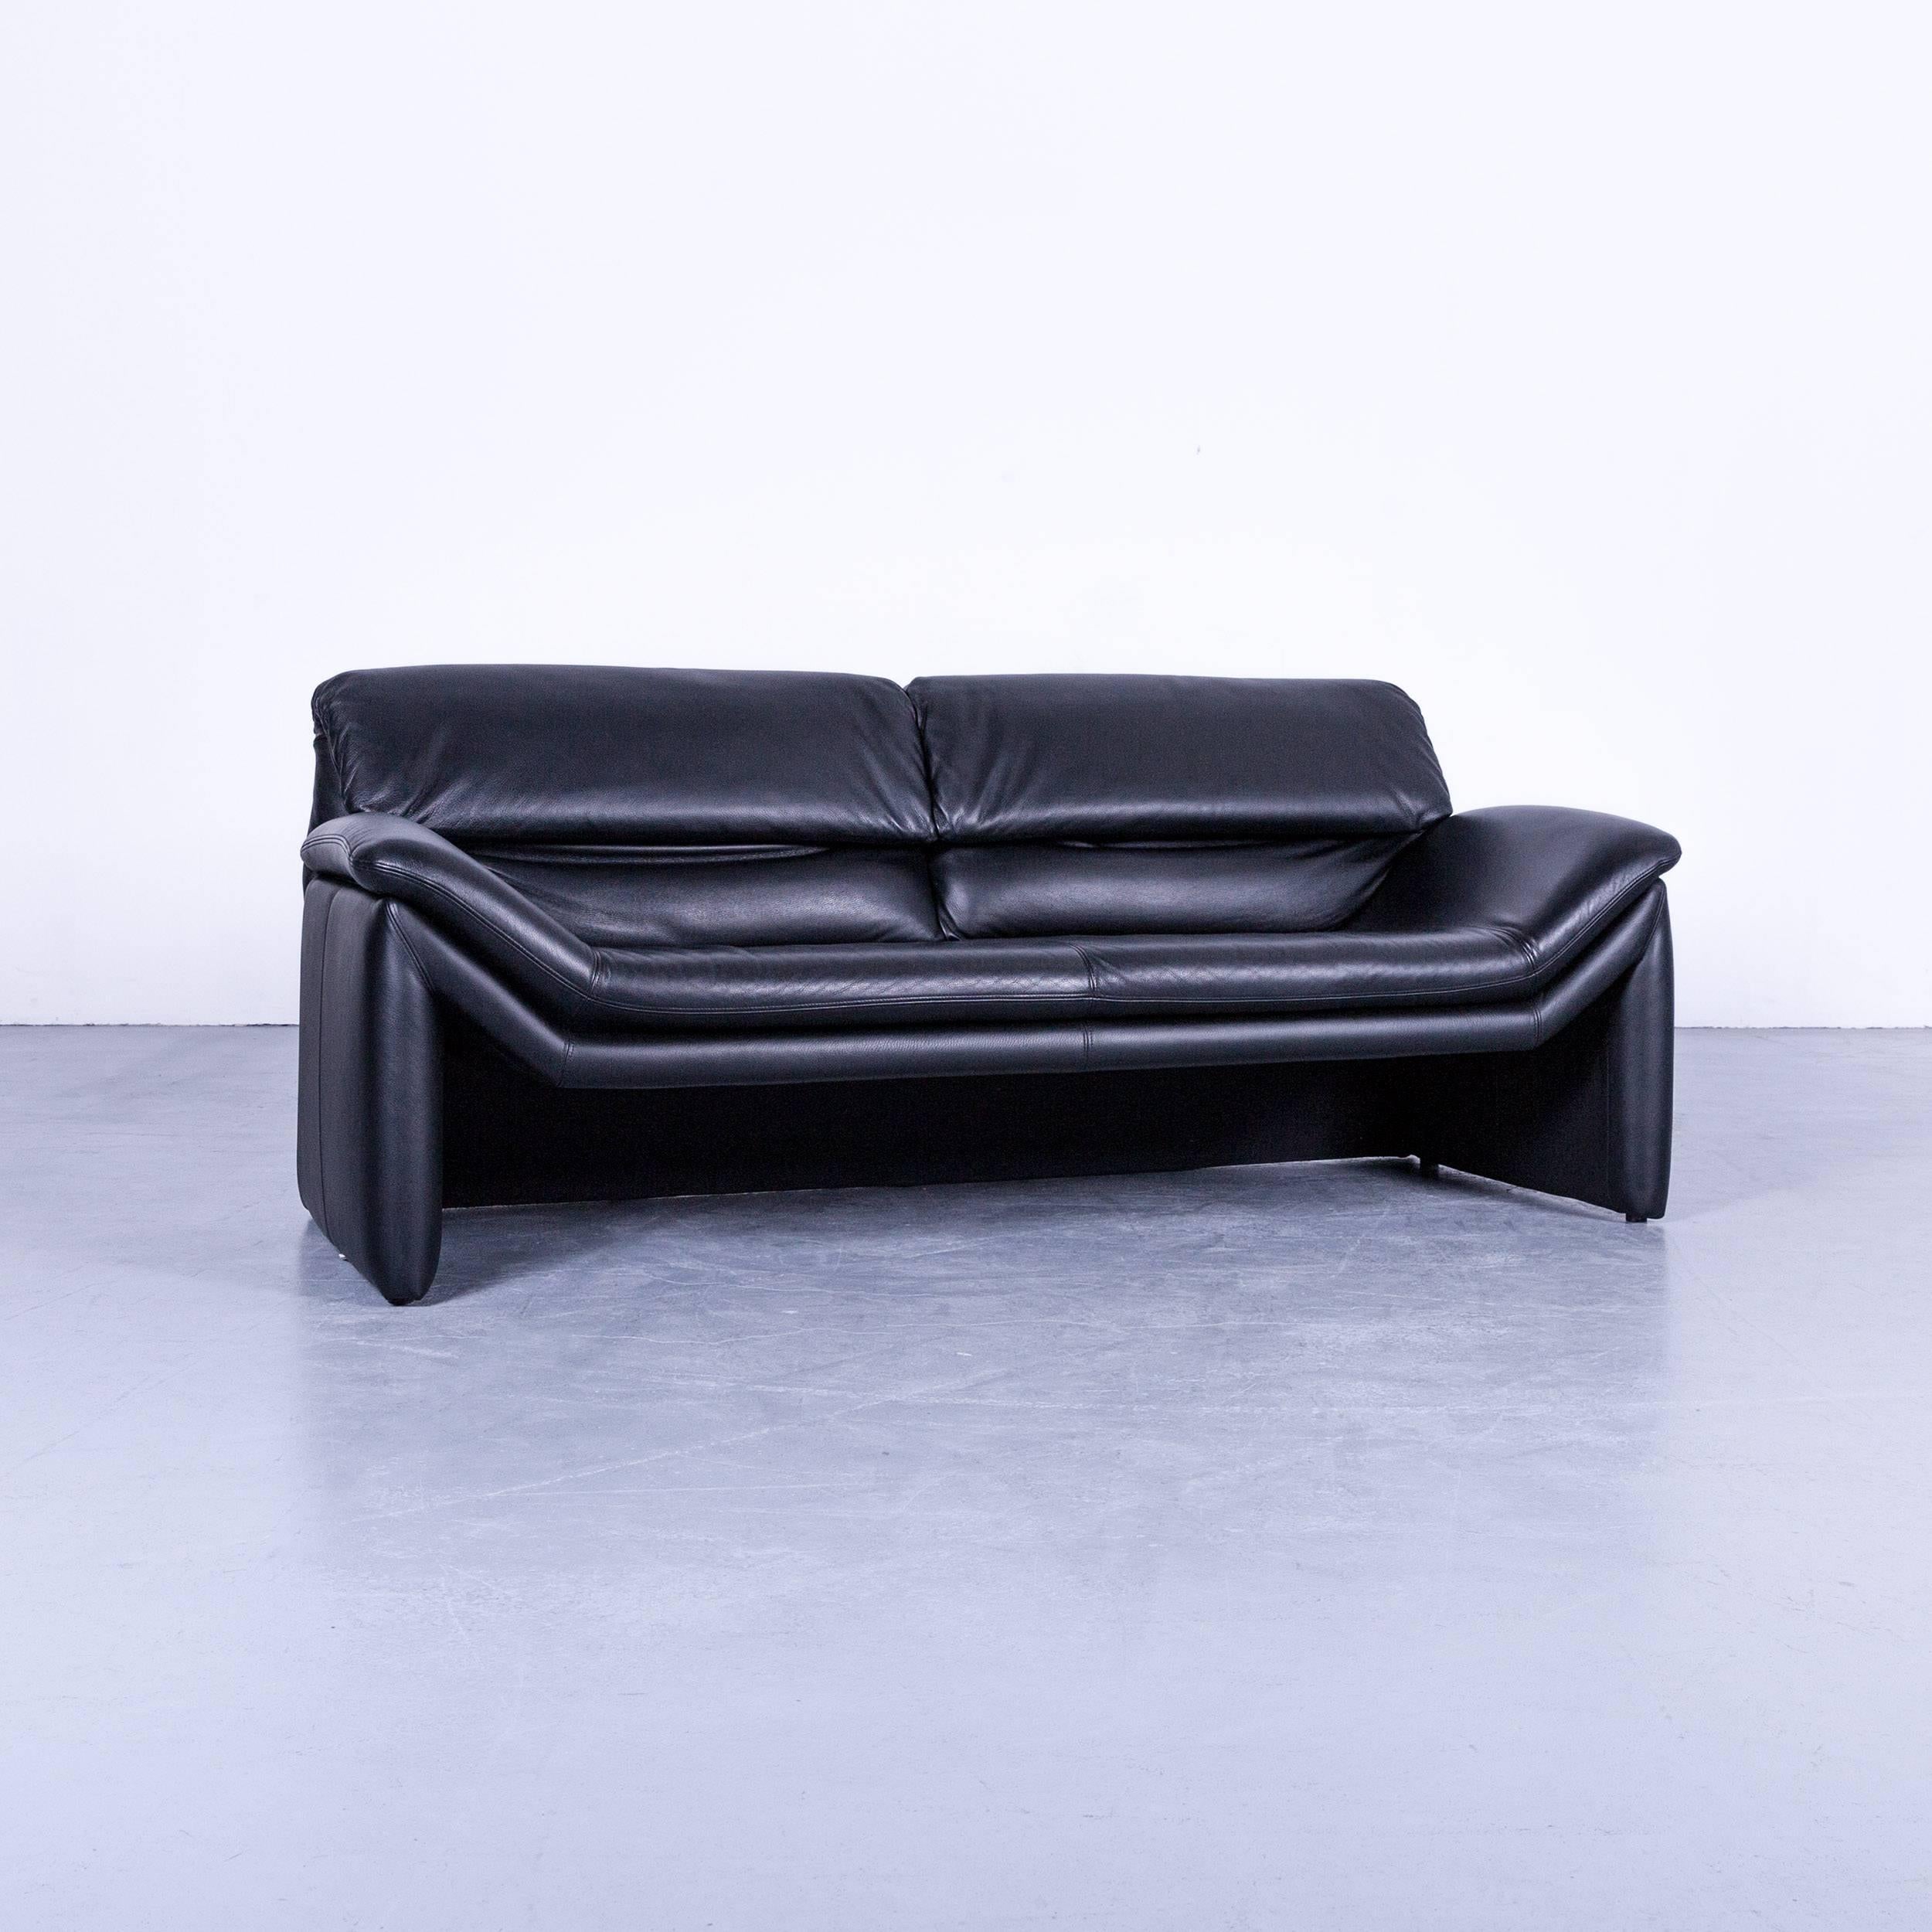 Black colored original De Sede designer leather sofa in a minimalistic and modern design, with convenient functions, made for pure comfort and flexibility.